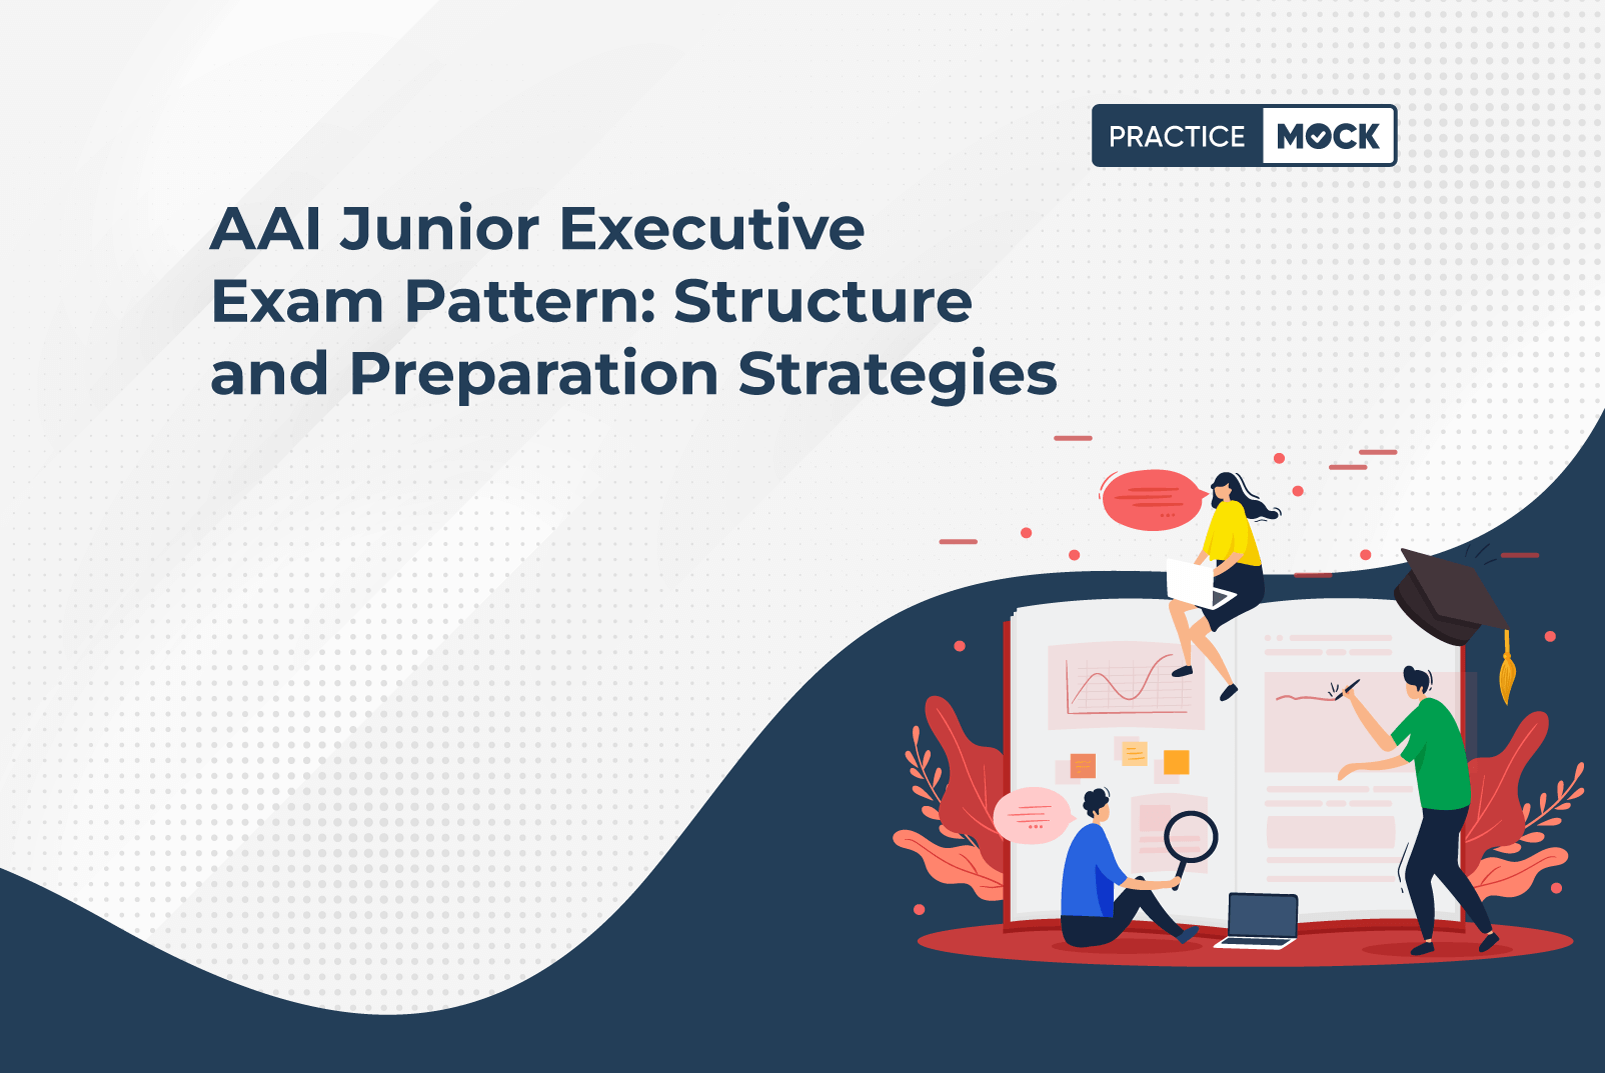 AAI Junior Executive Exam Pattern: Structure and Preparation Strategies